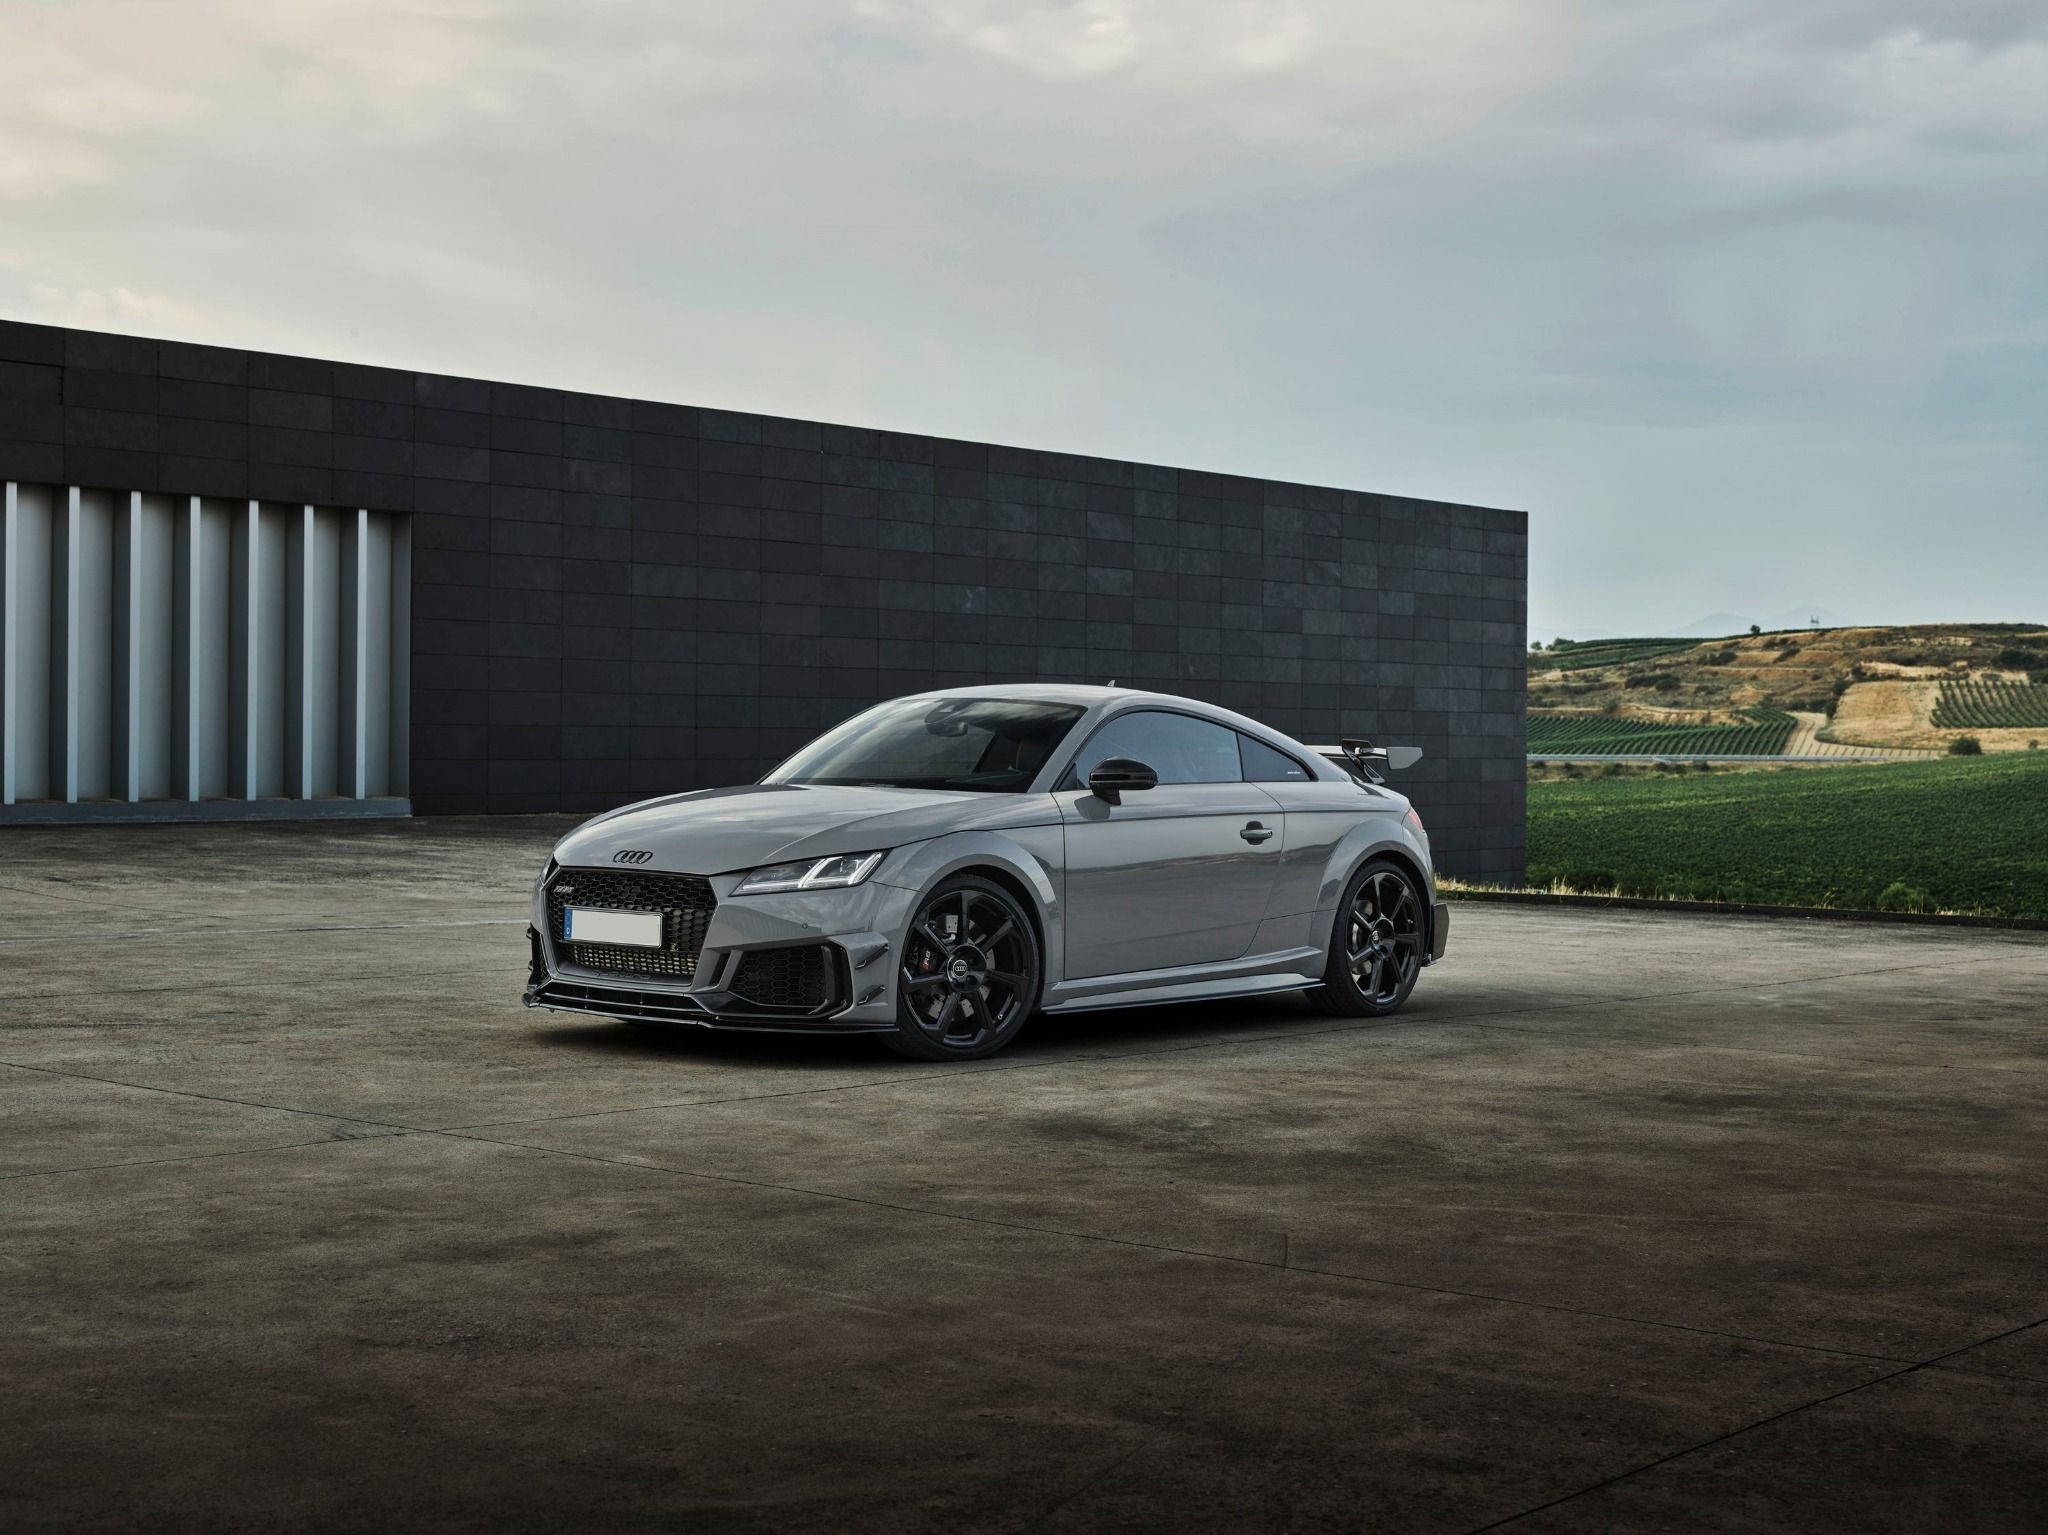 The history of the Audi TT